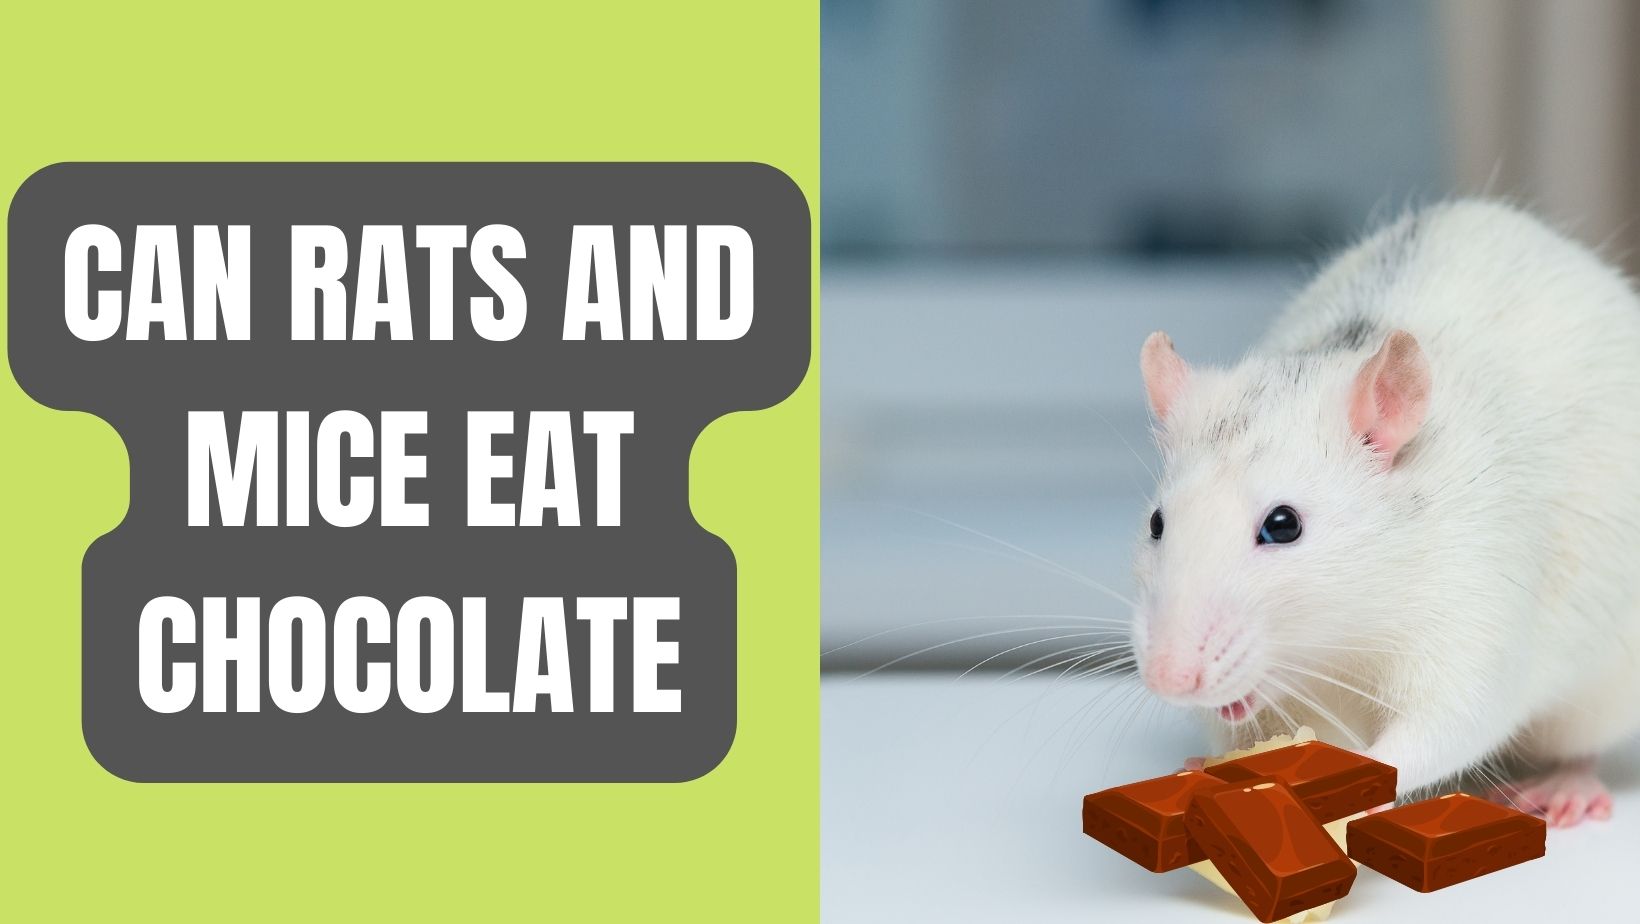 Can Rats and Mice Eat Chocolate? 6 Benefits and Risks